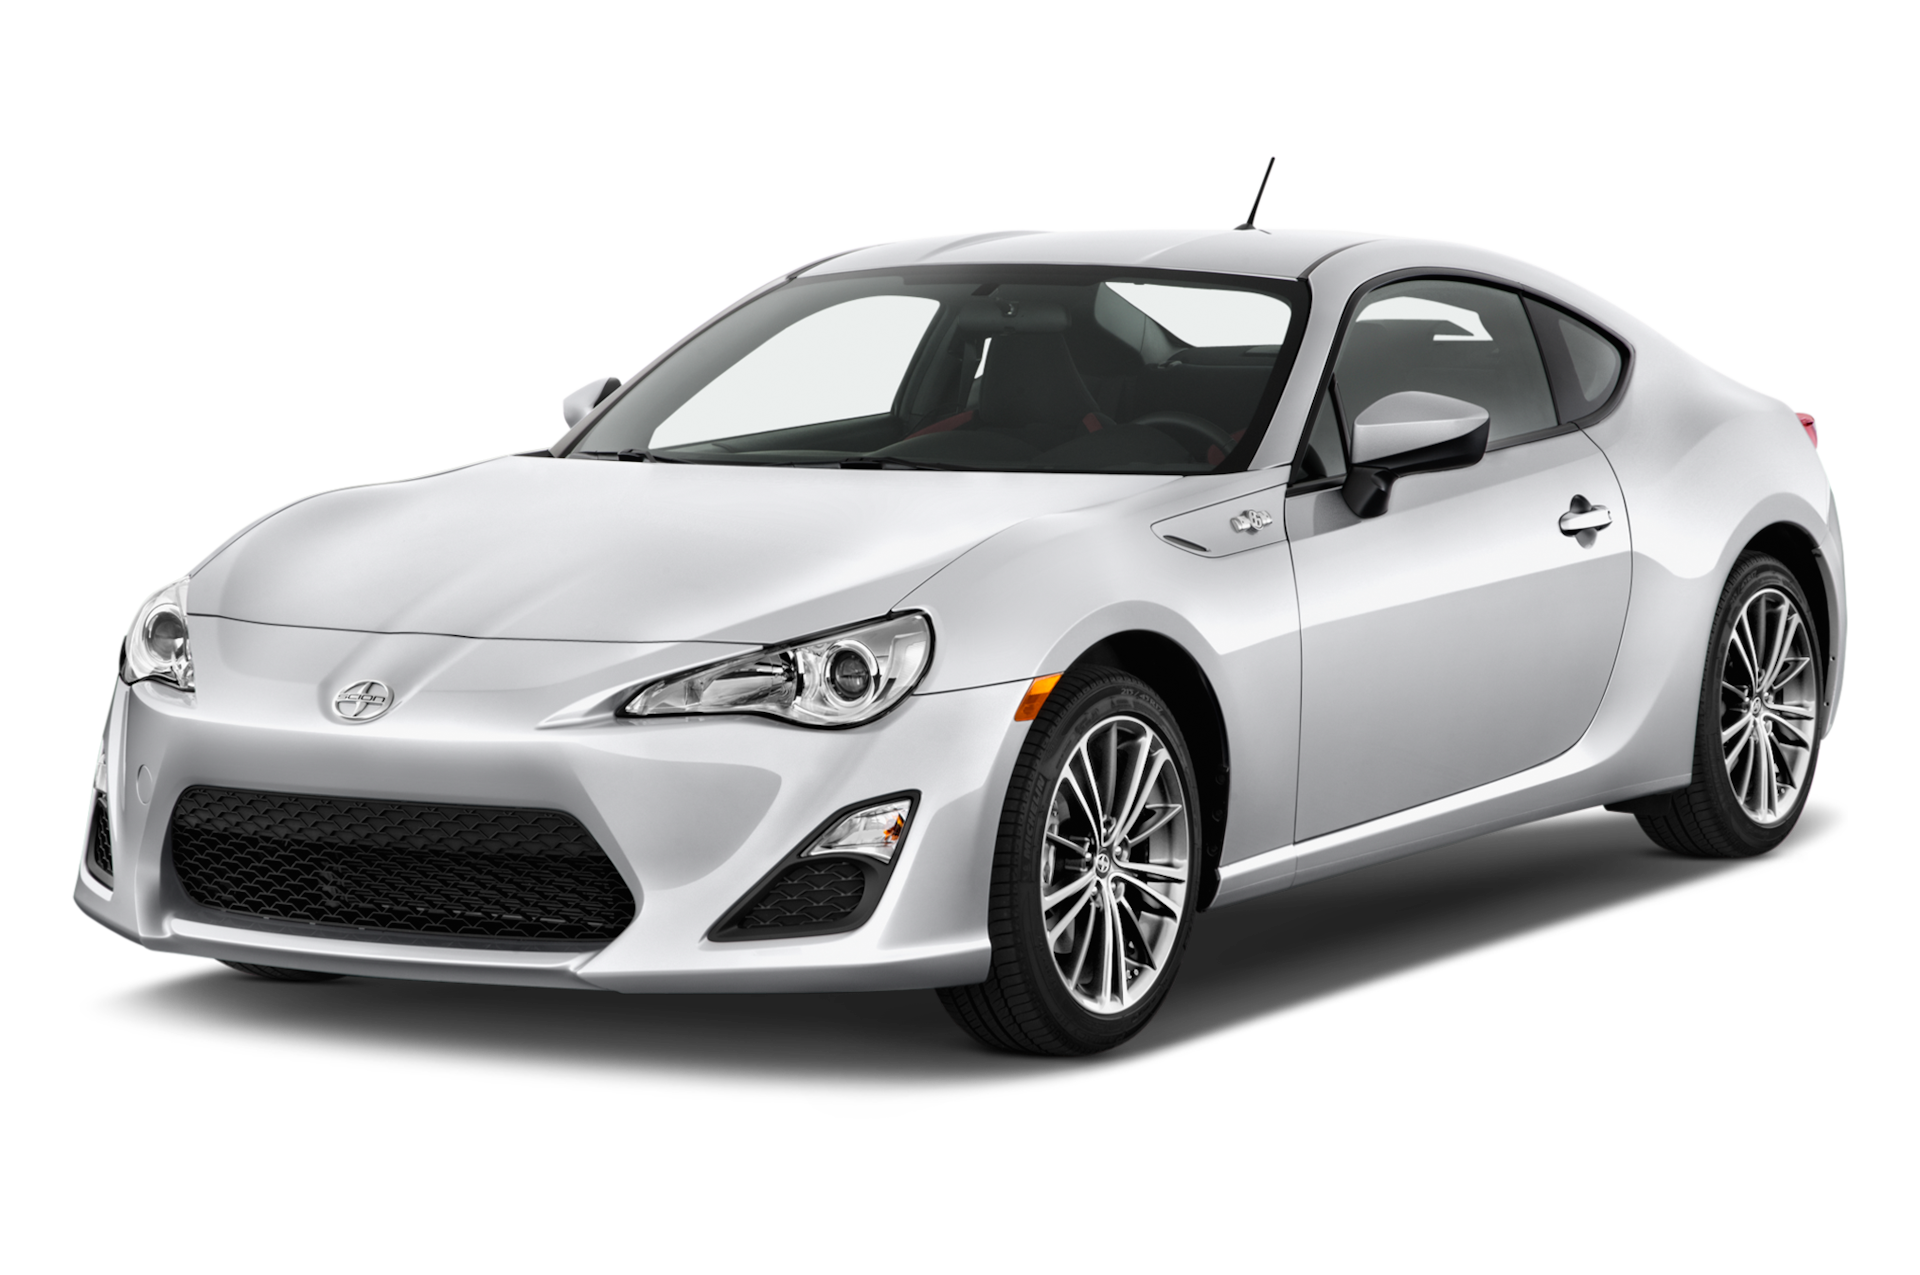 2014 Scion FR-S Prices, Reviews, and Photos - MotorTrend